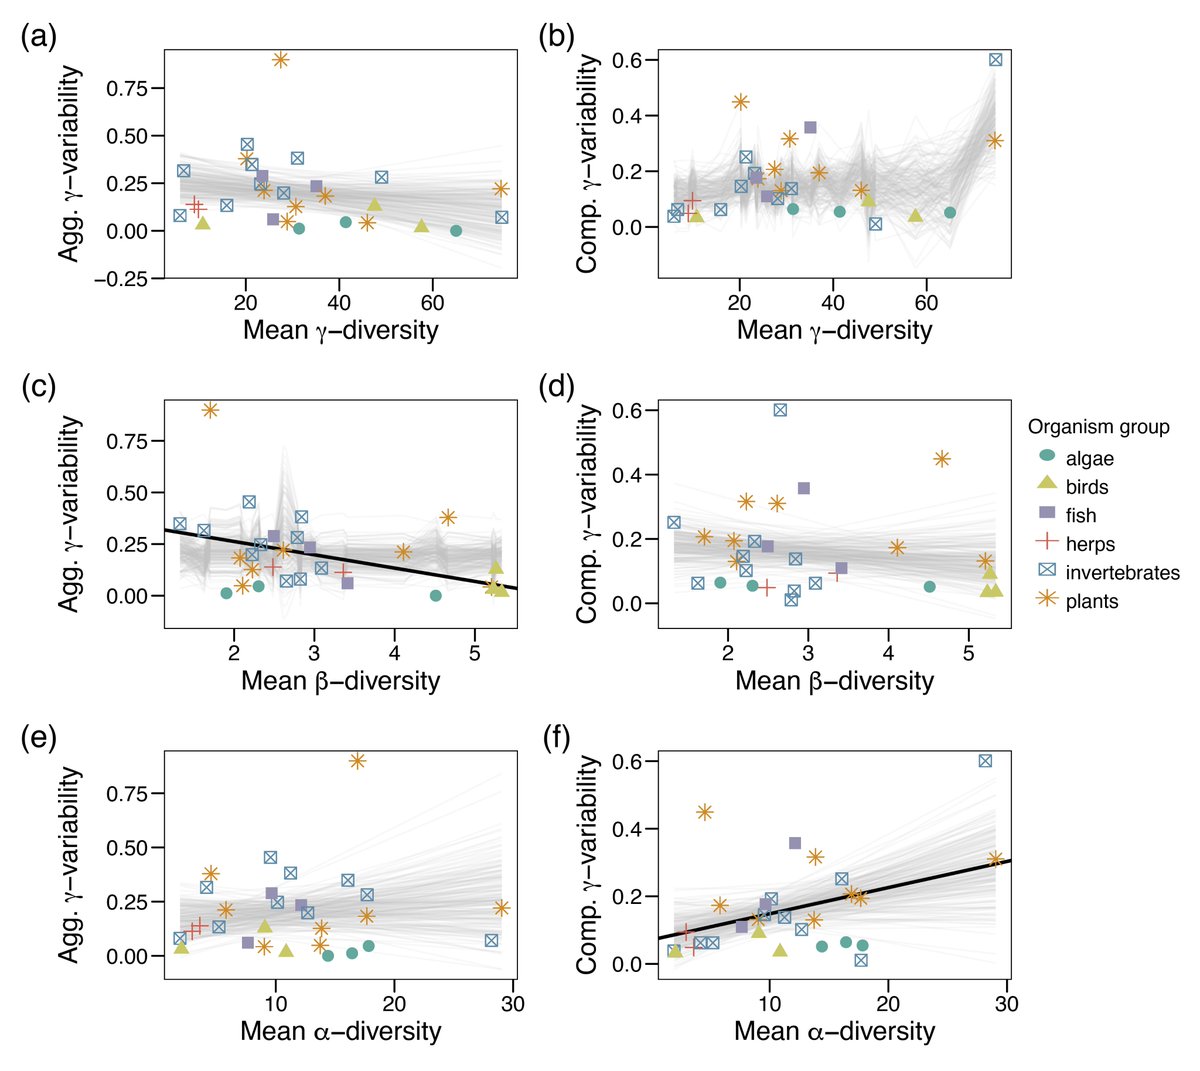 New in @ESAEcology: Diversity-stability relationships across organism groups and ecosystem types become decoupled across spatial scales doi.org/10.1002/ecy.41… With #OpenData in @edigotdata #Metacommunities #Synchrony #Stability #Biodiversity #NSFFunded @NSF